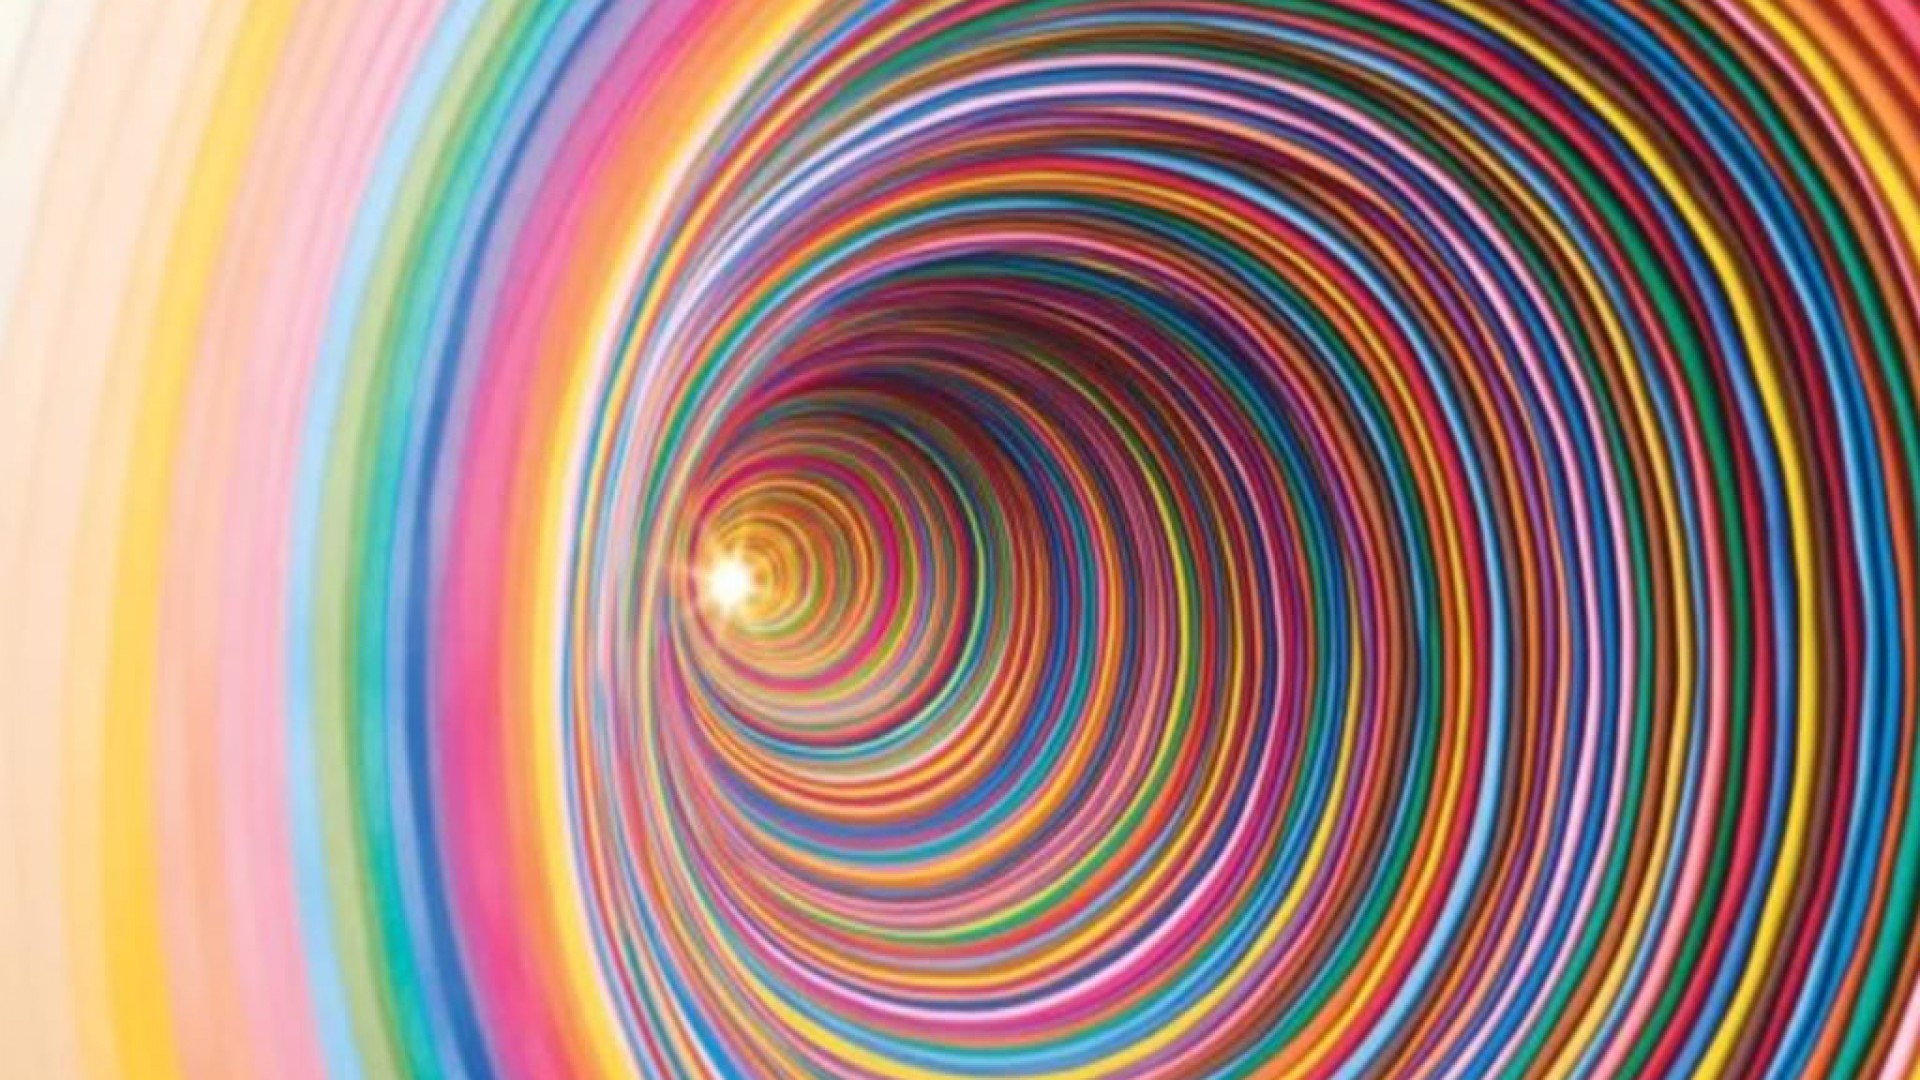 Optical illusion full hd, hdtv, fhd, 1080p wallpapers hd, desktop  backgrounds 1920x1080, images and pictures